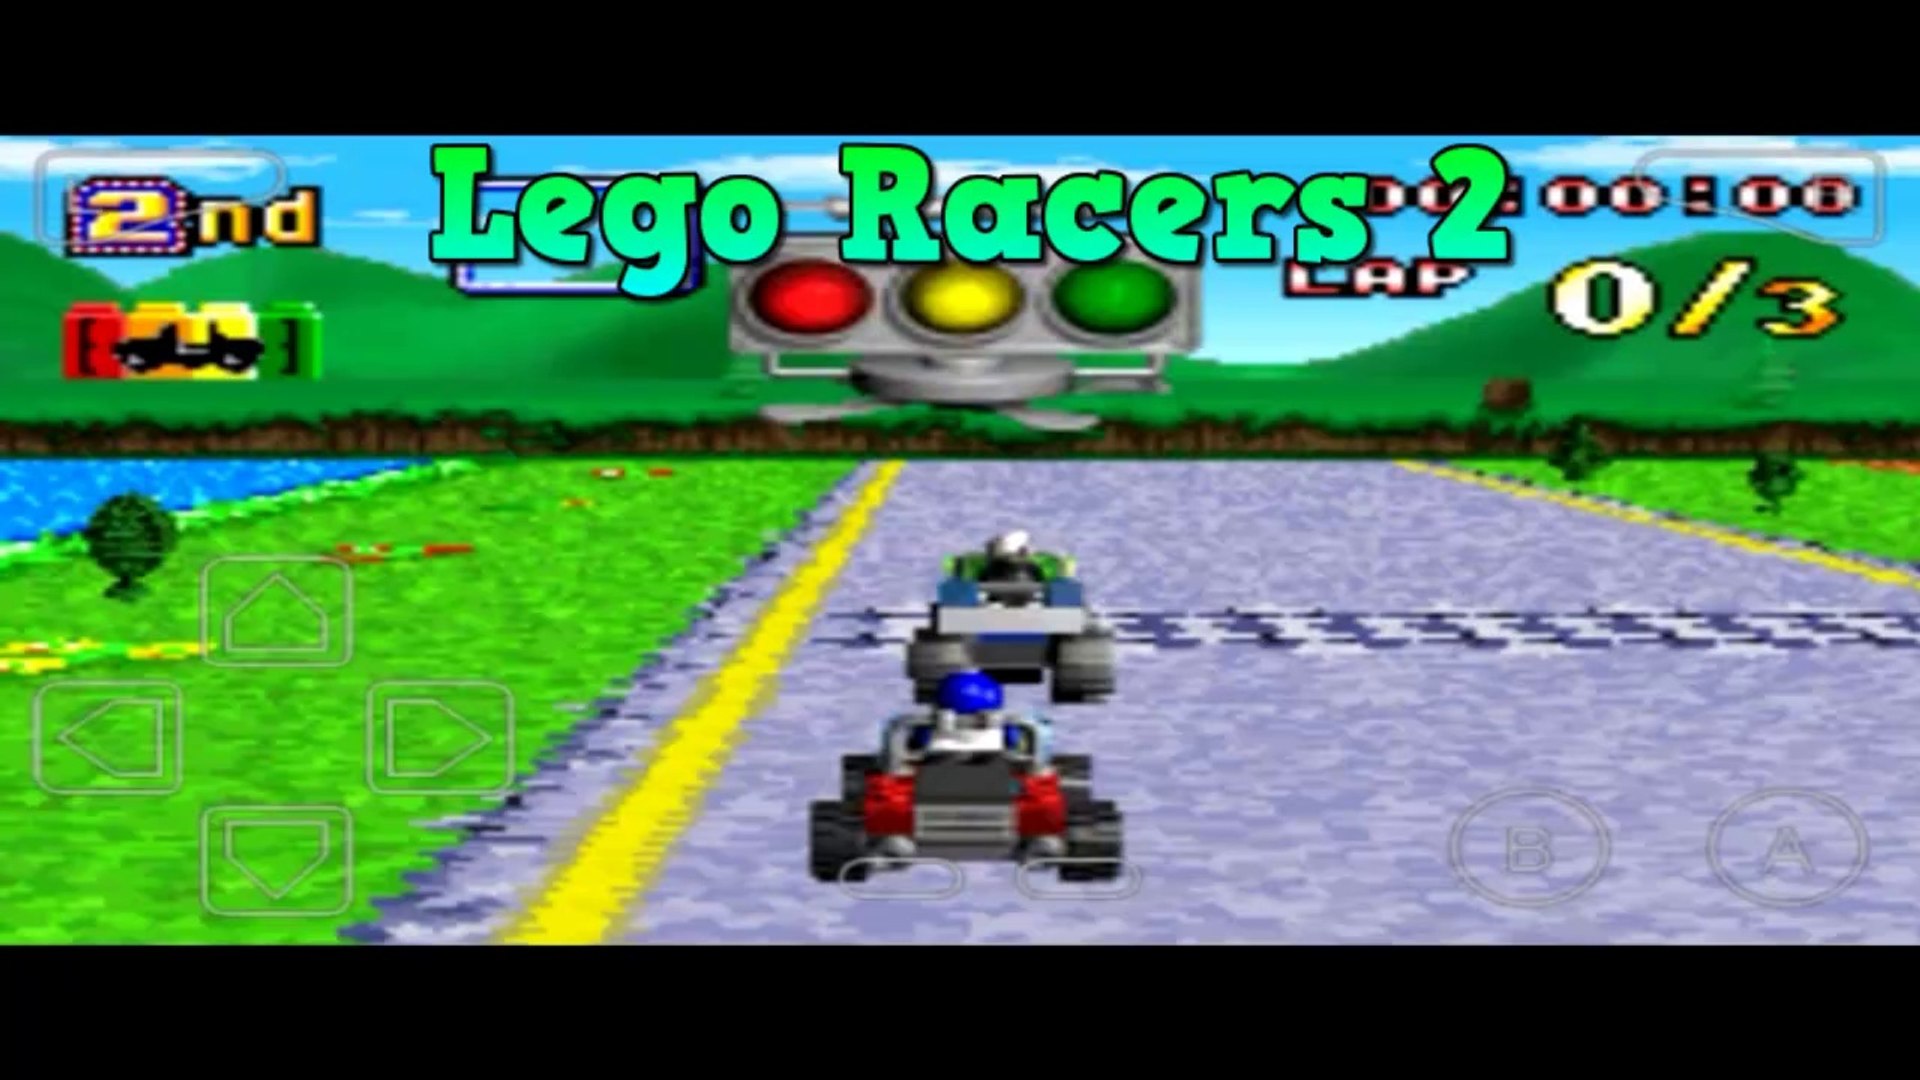 Lego Racers 2 Android Gameplay GBA Games Emulation - video Dailymotion